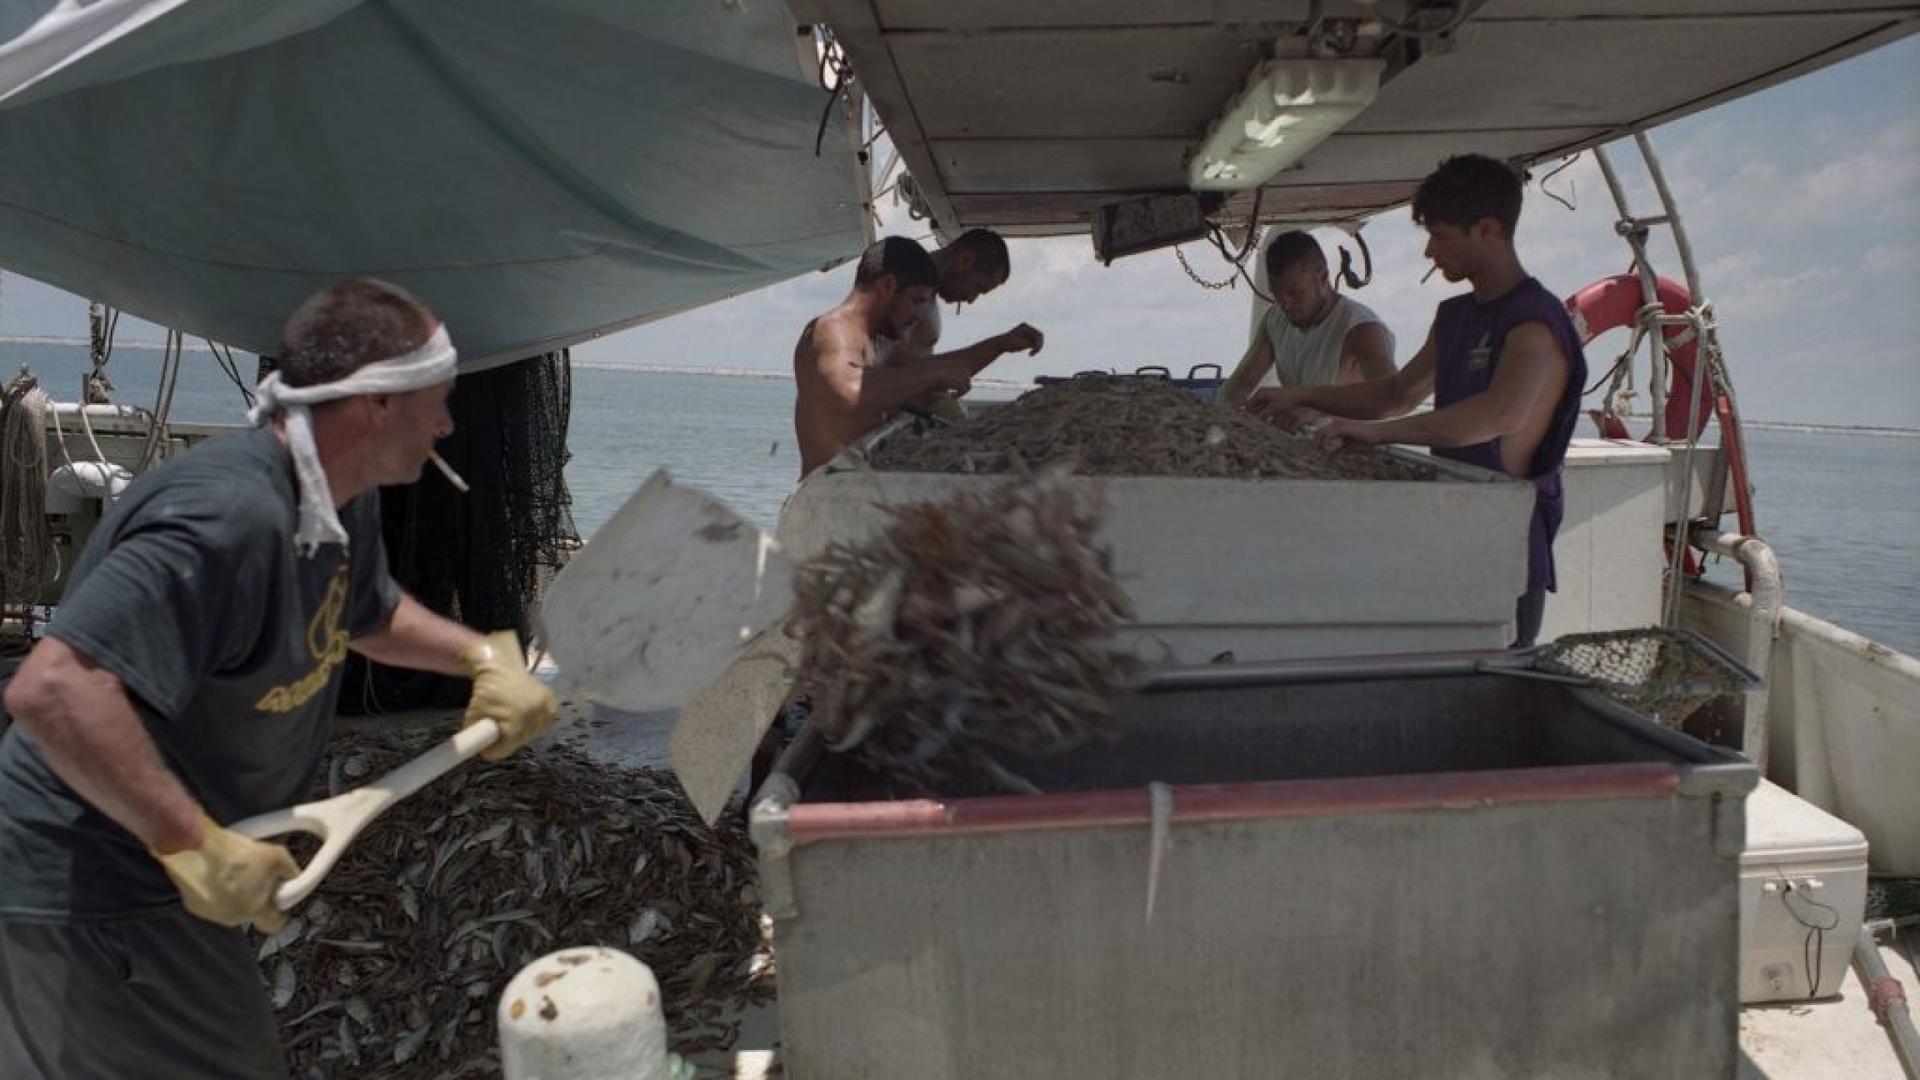 Several men are shown on a boat processing shrimp with one man using a shovel. 